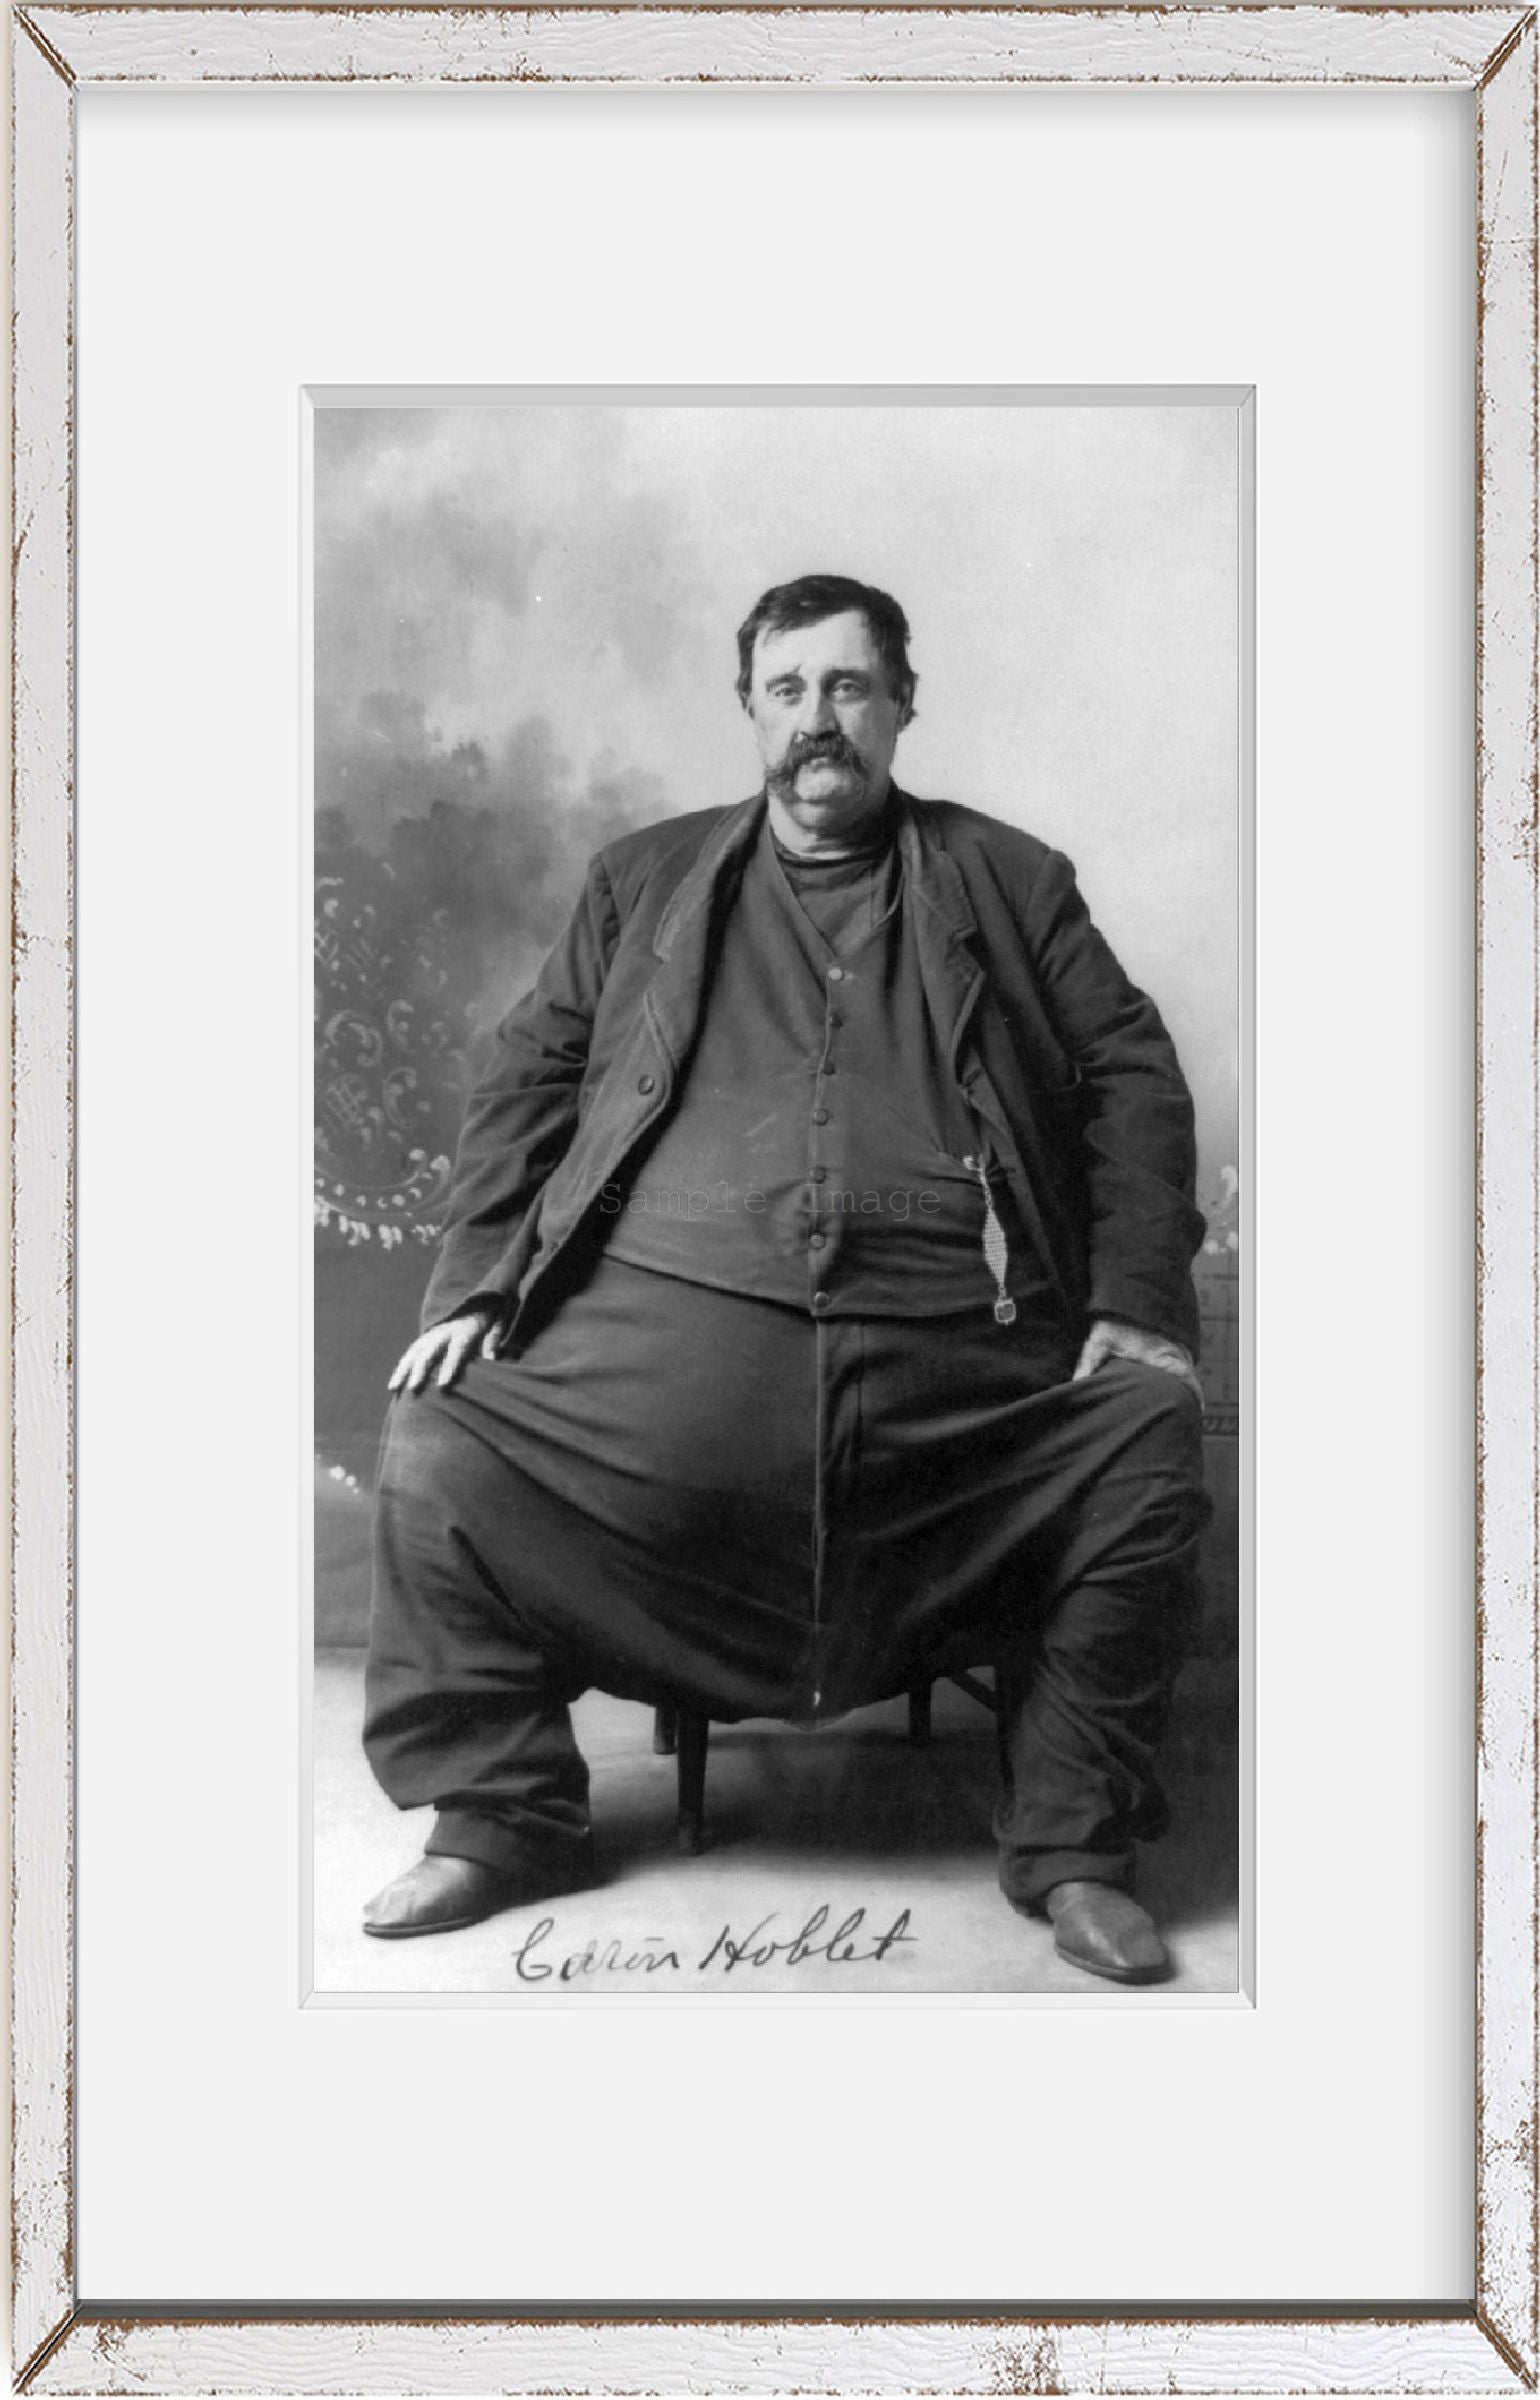 c1909 Oct. 4 photograph of C- Hoblet Summary: Enormously fat man